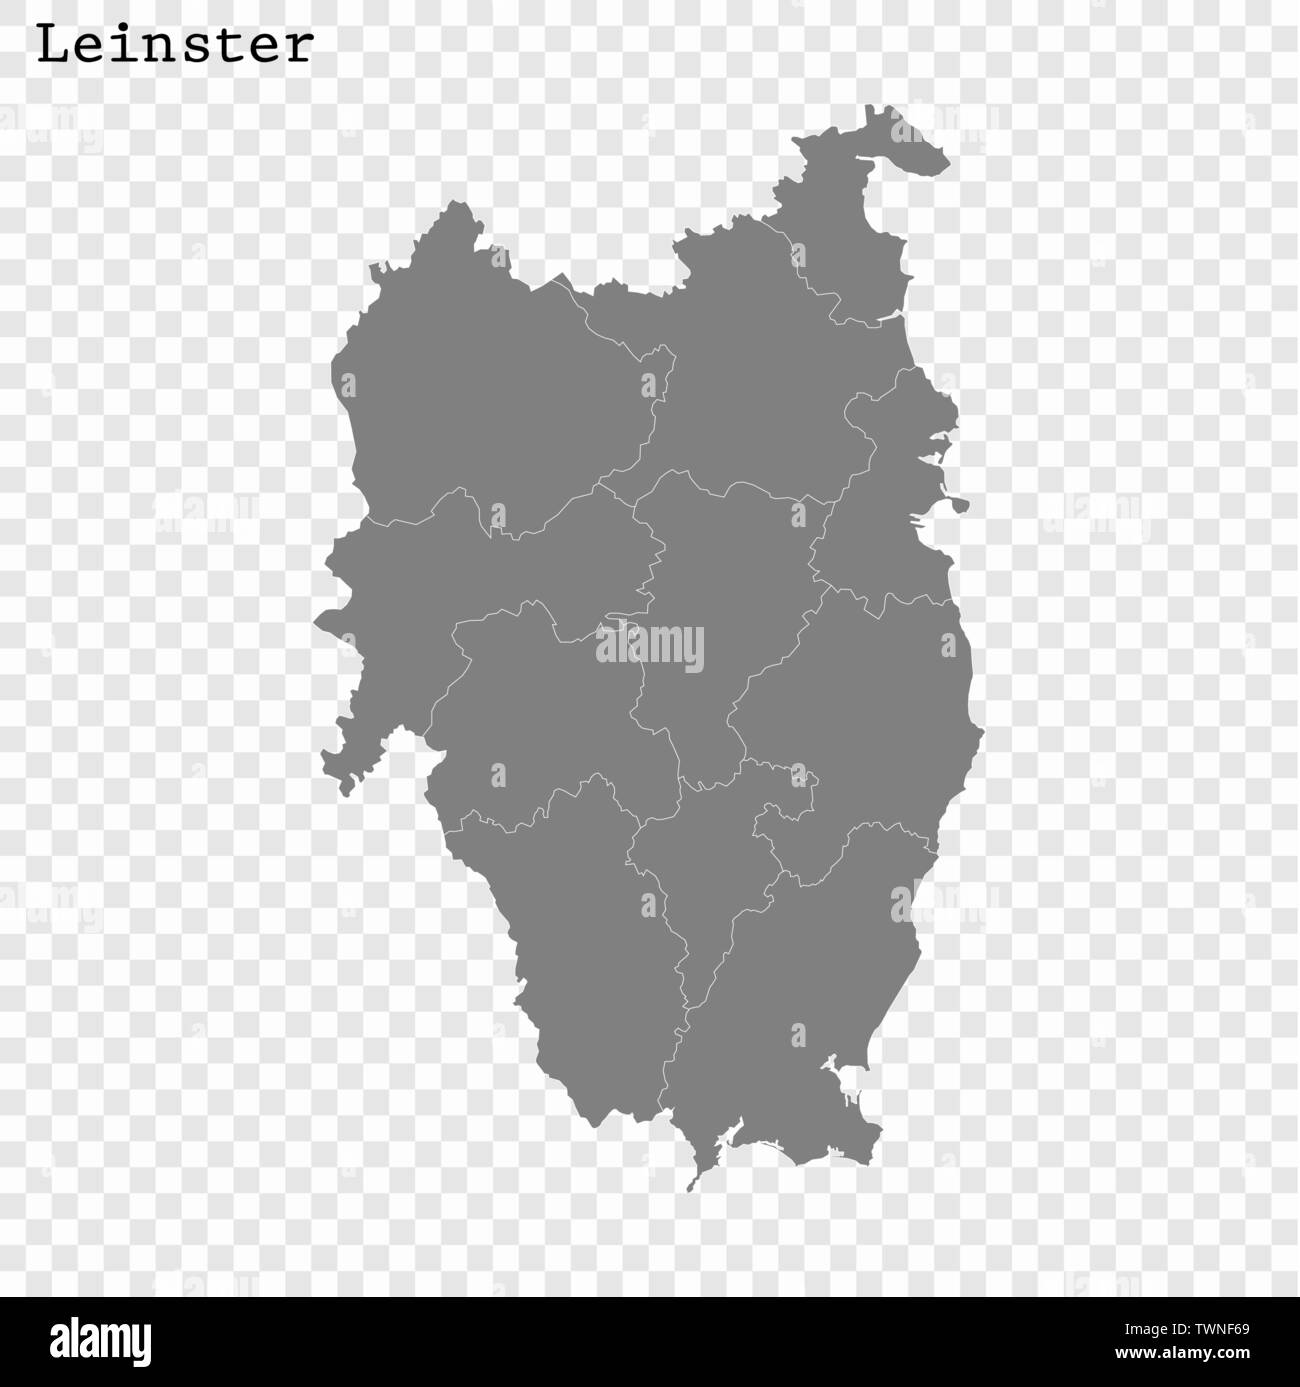 High Quality Map Of Leinster Is A Province Of Ireland With Borders Of The Counties TWNF69 